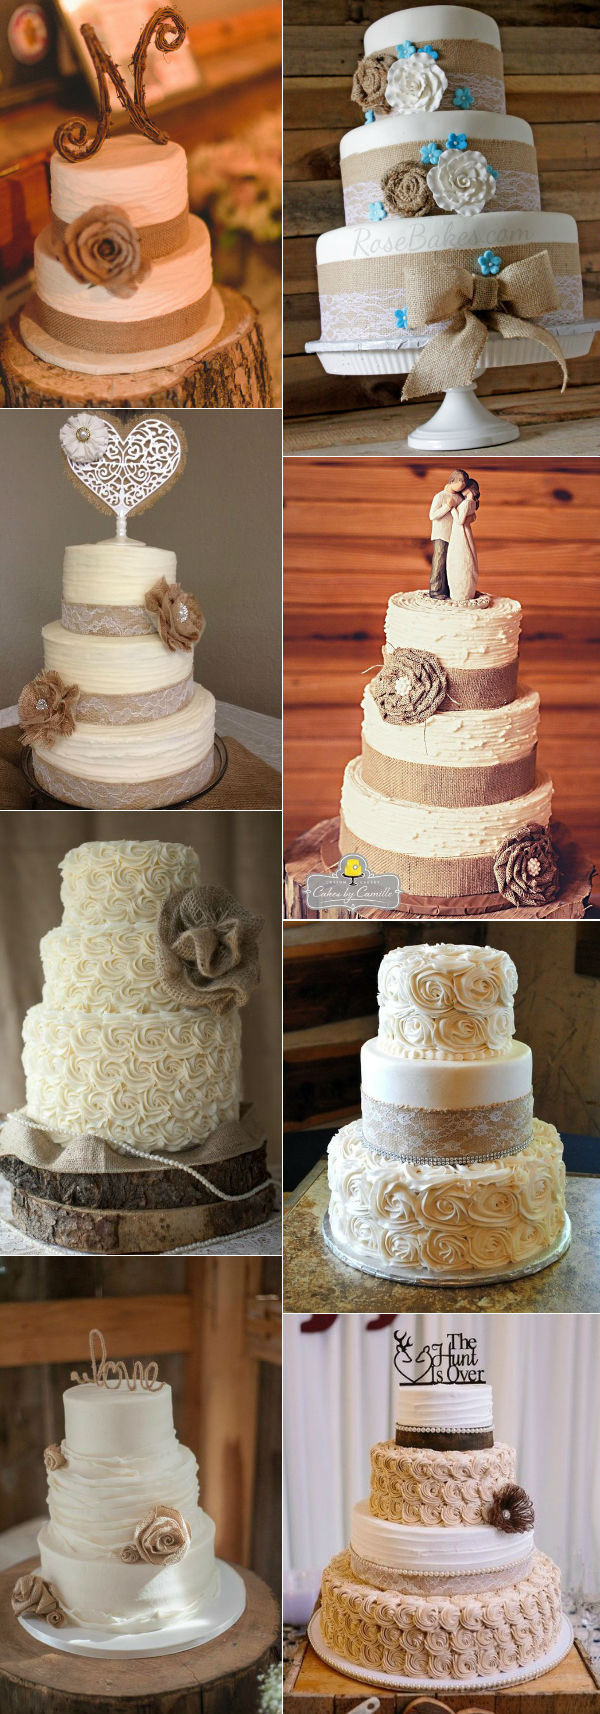 Rustic Fall Wedding Cakes
 32 Amazing Wedding Cakes Perfect For Fall